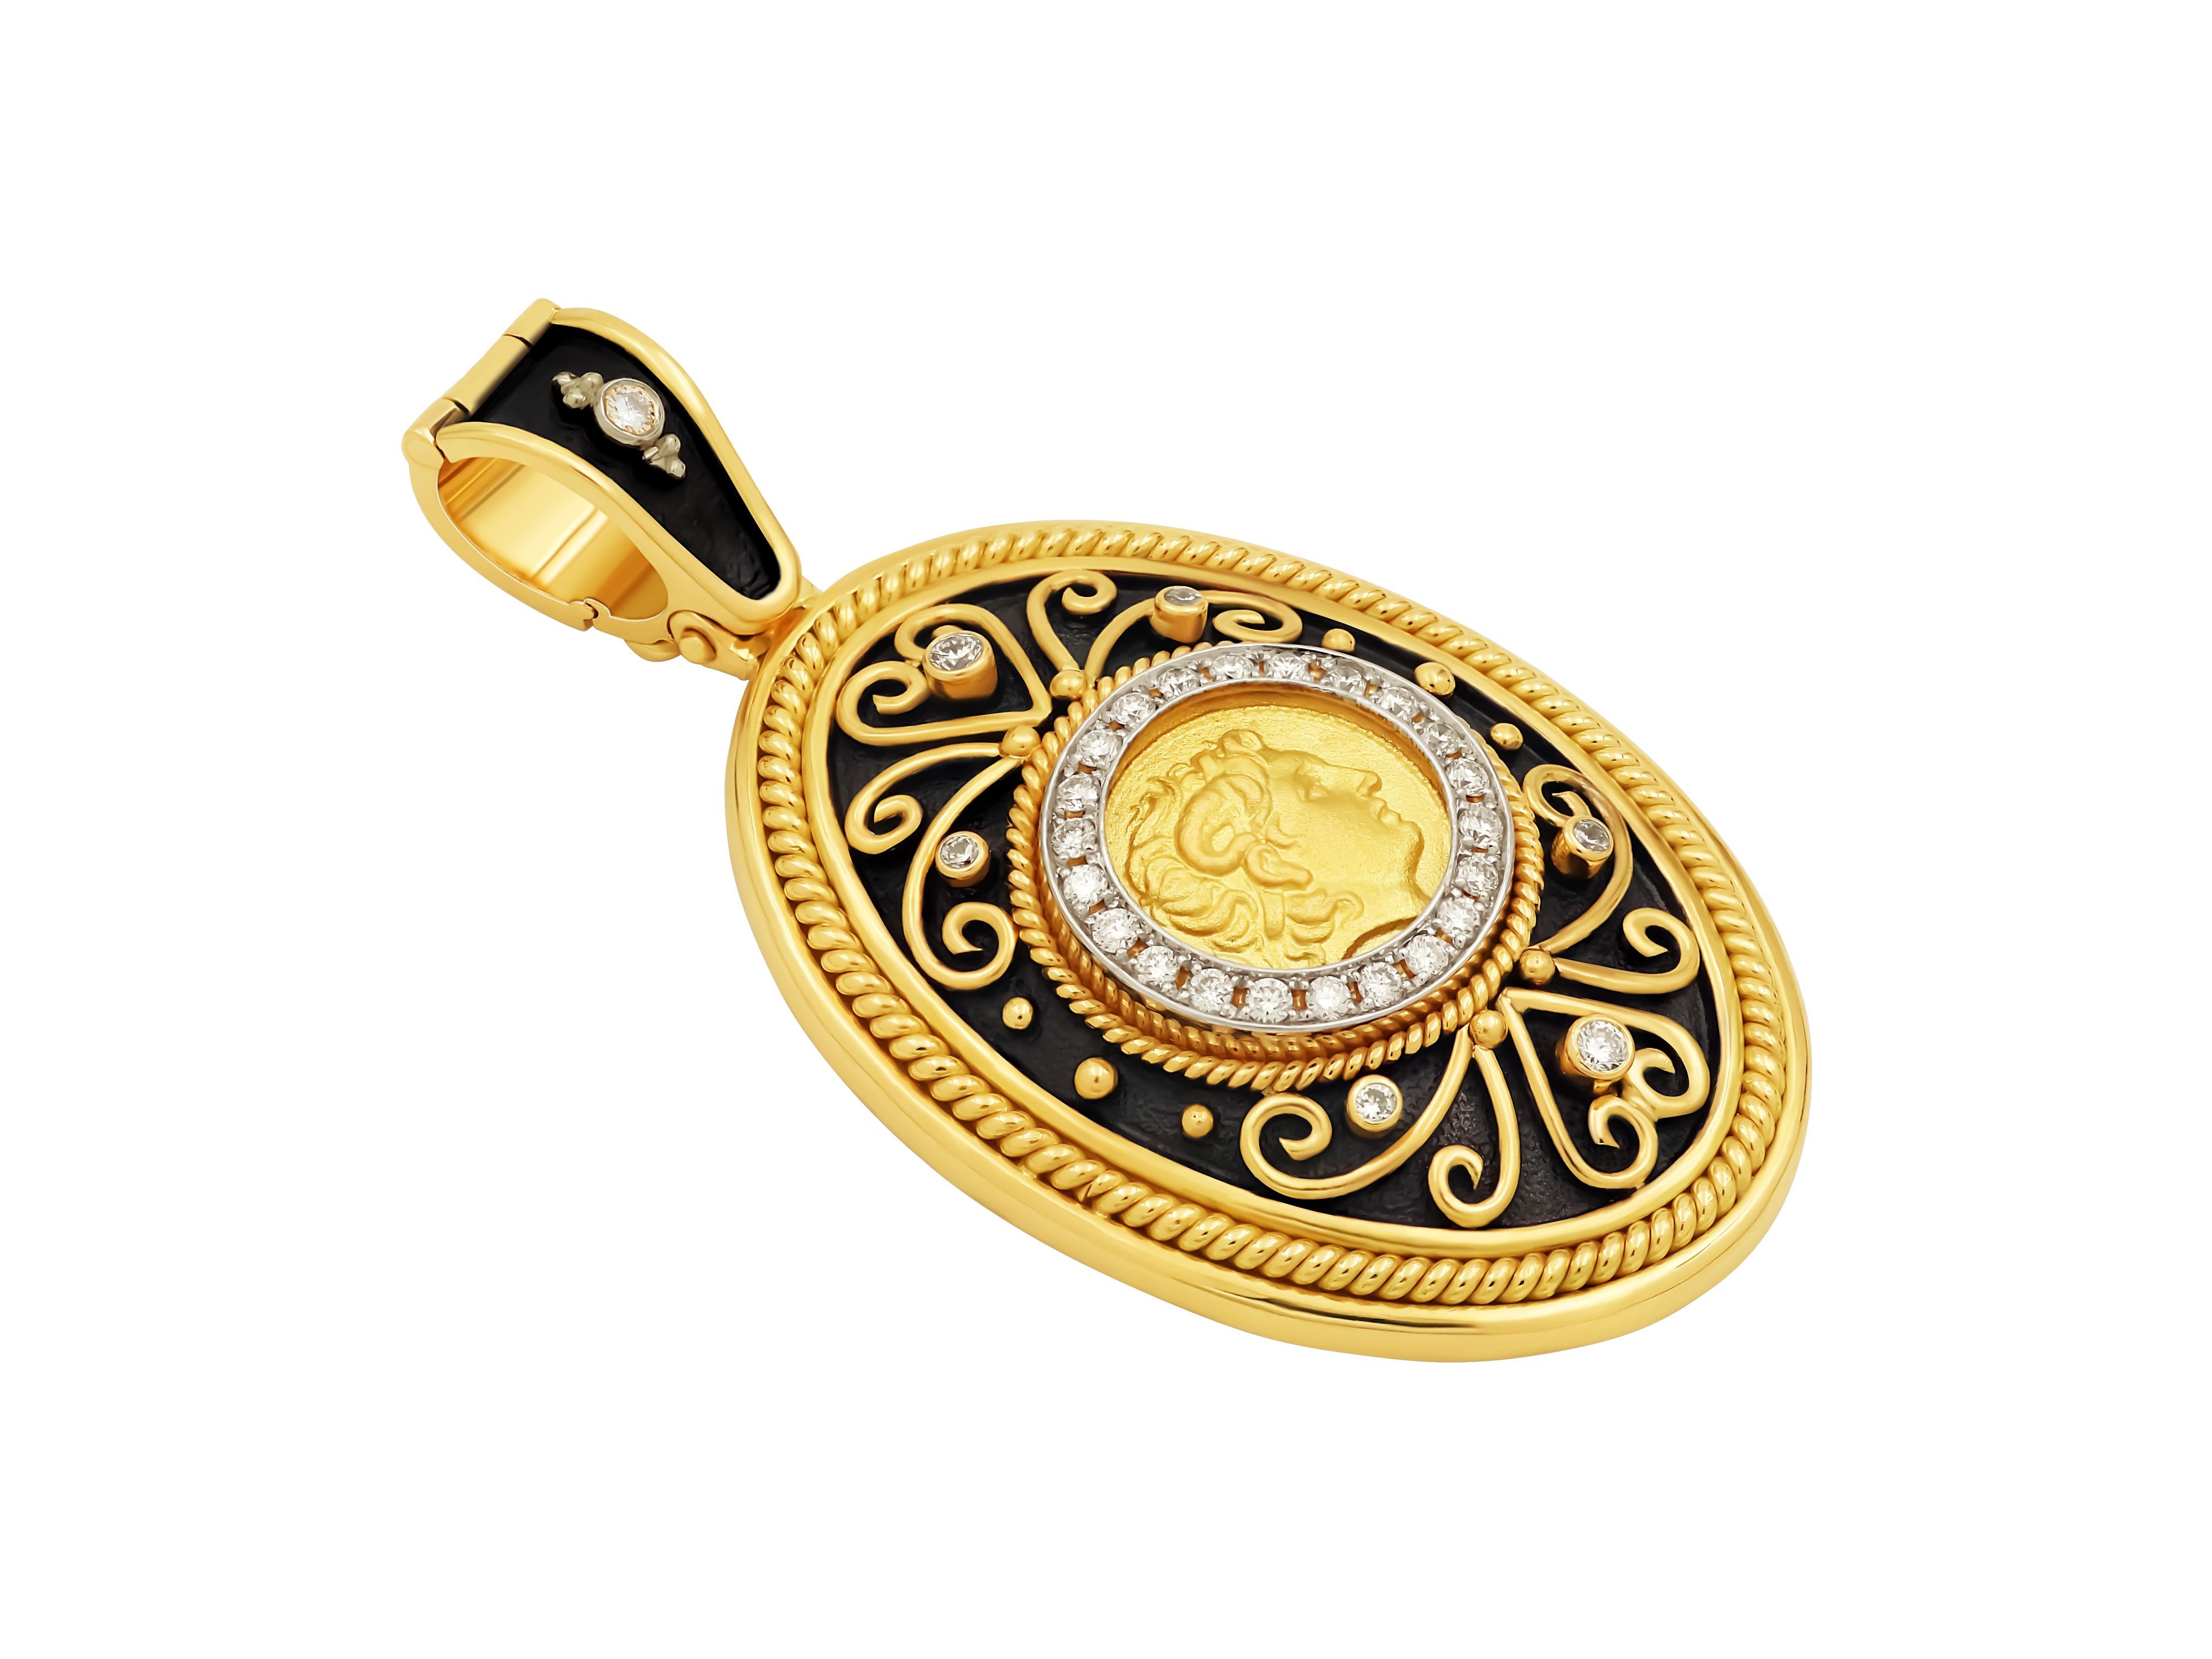 Noir collection pendant in 18k yellow gold. Hosting a coin of Alexander the Great surrounded with 0.32 carats brilliant cut diamonds and decorated with our famous hand made wire and granulation work. With our classic brilliant diamond decorated